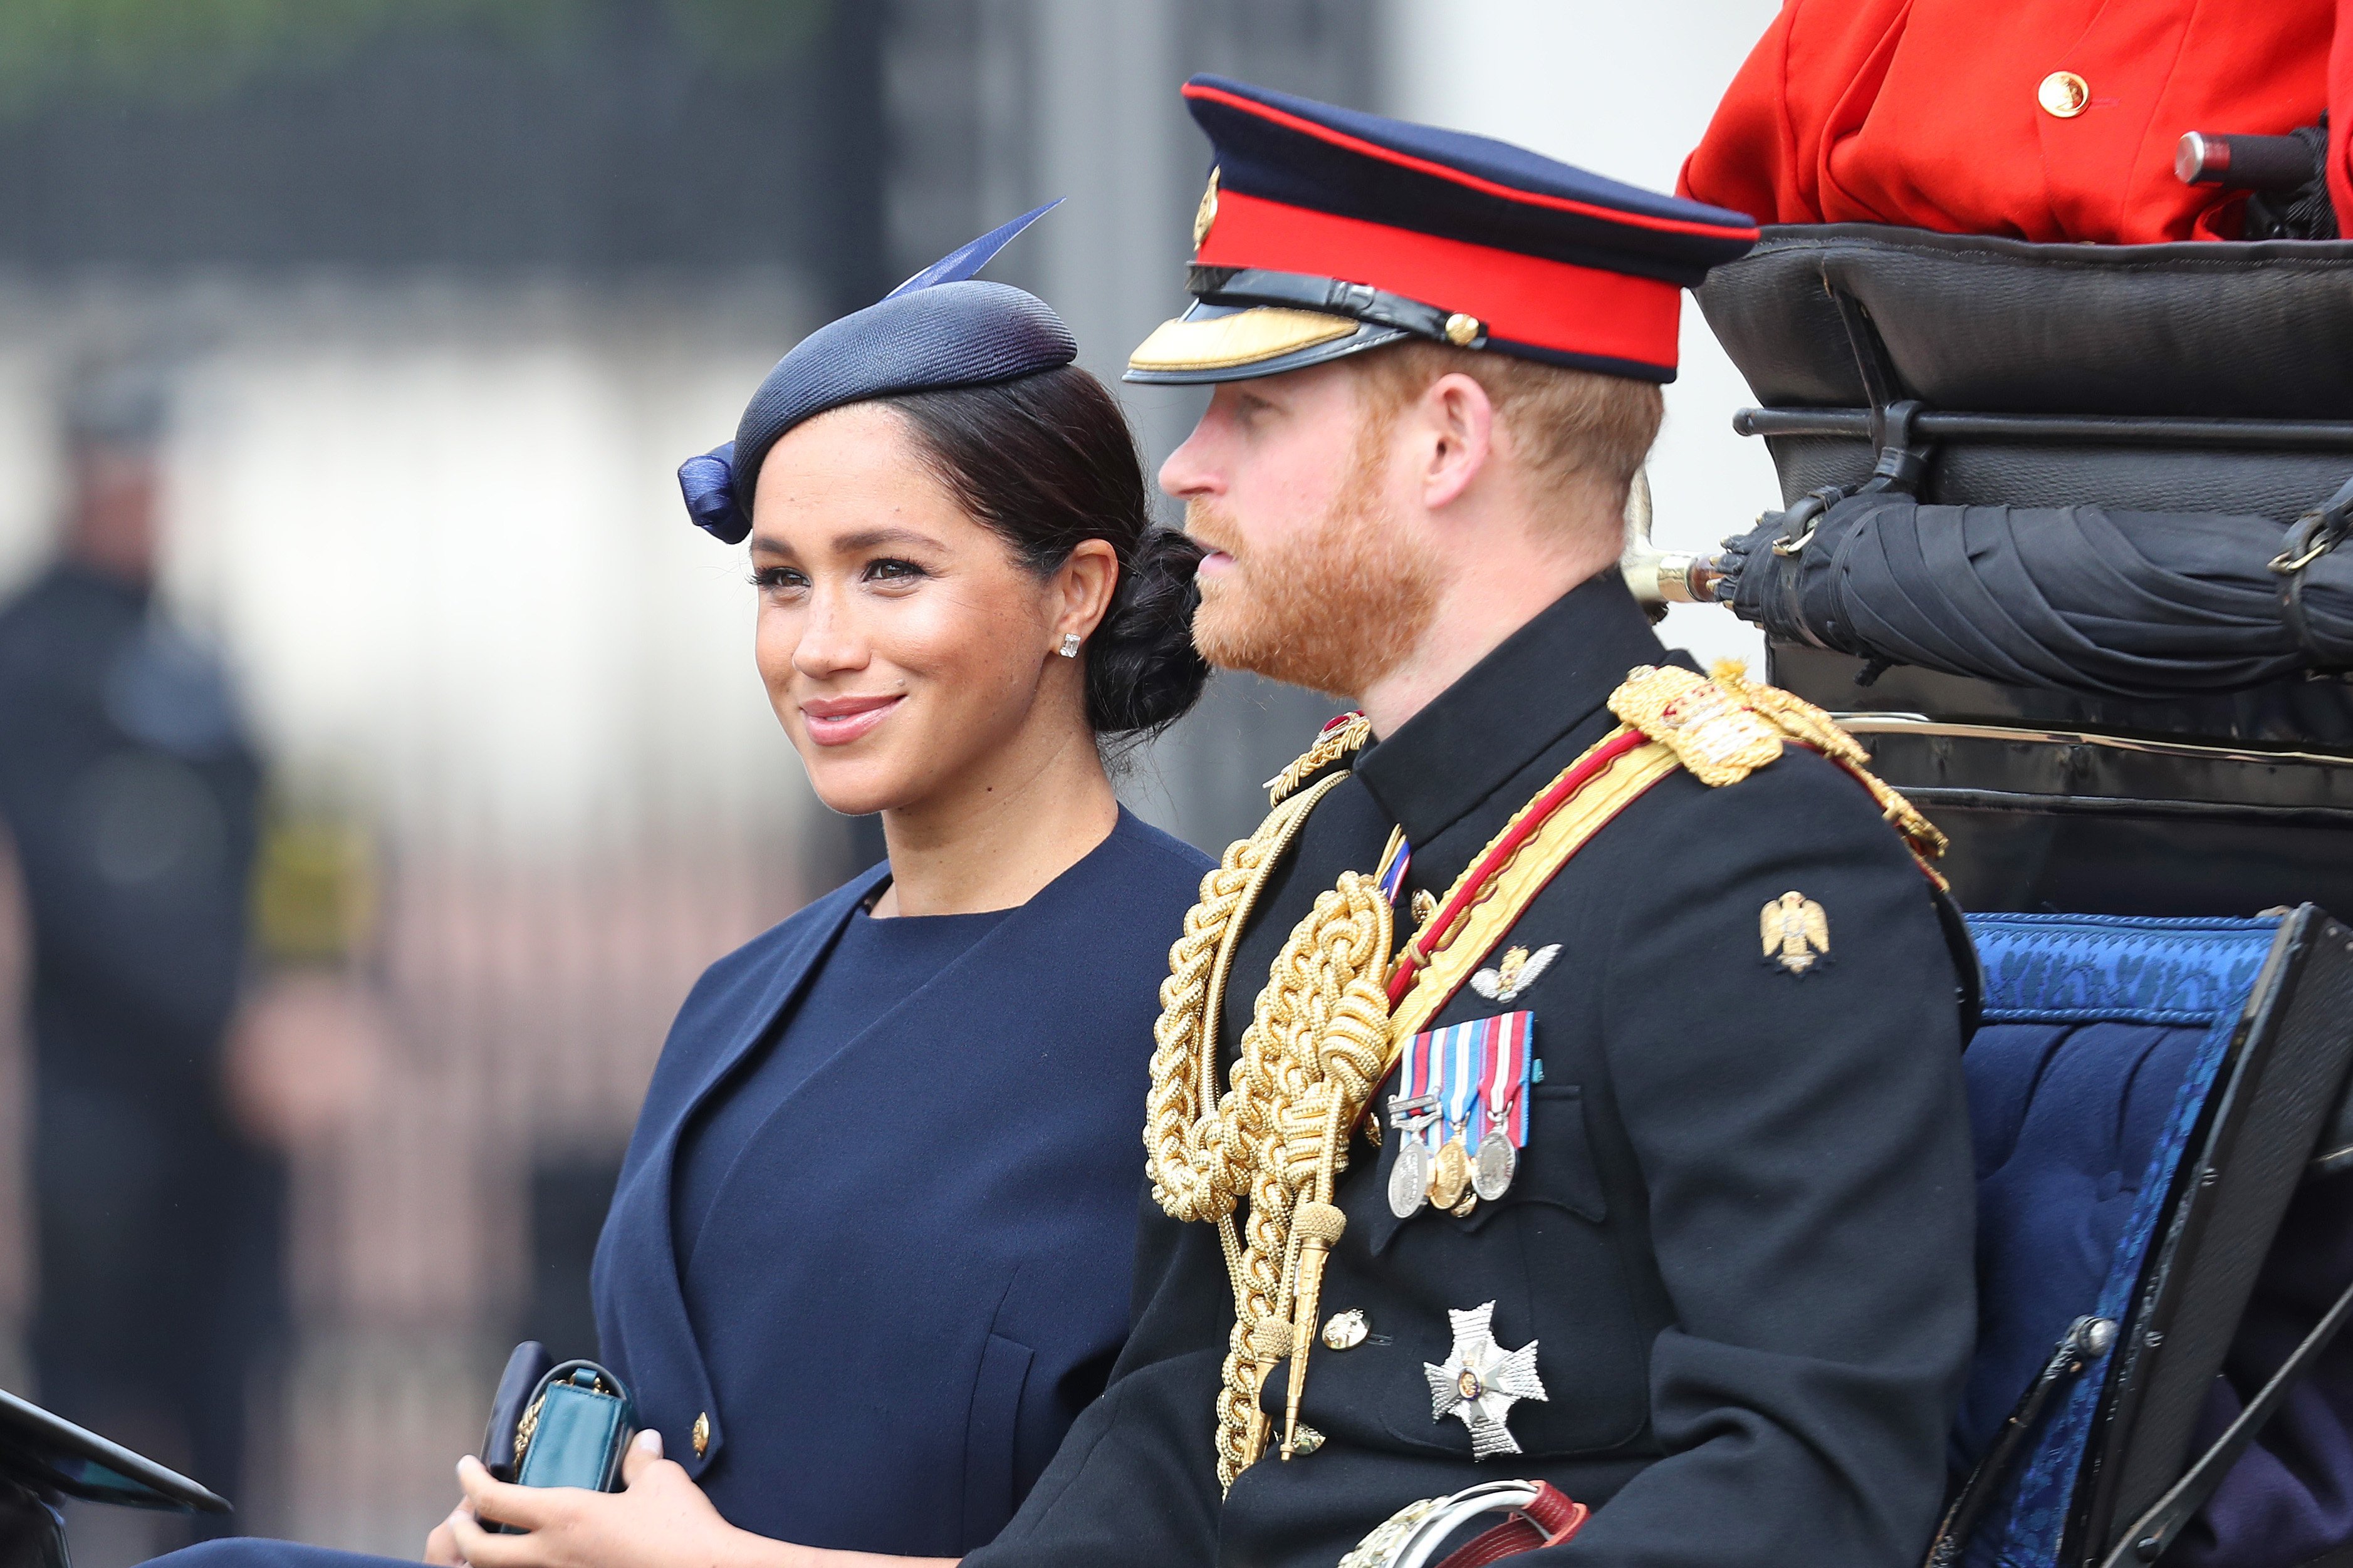 Meghan Markle and Prince Harry arriving at the Buckingham Palace for Trooping the Colour on June 08, 2019 in London, England | Photo: Getty Images